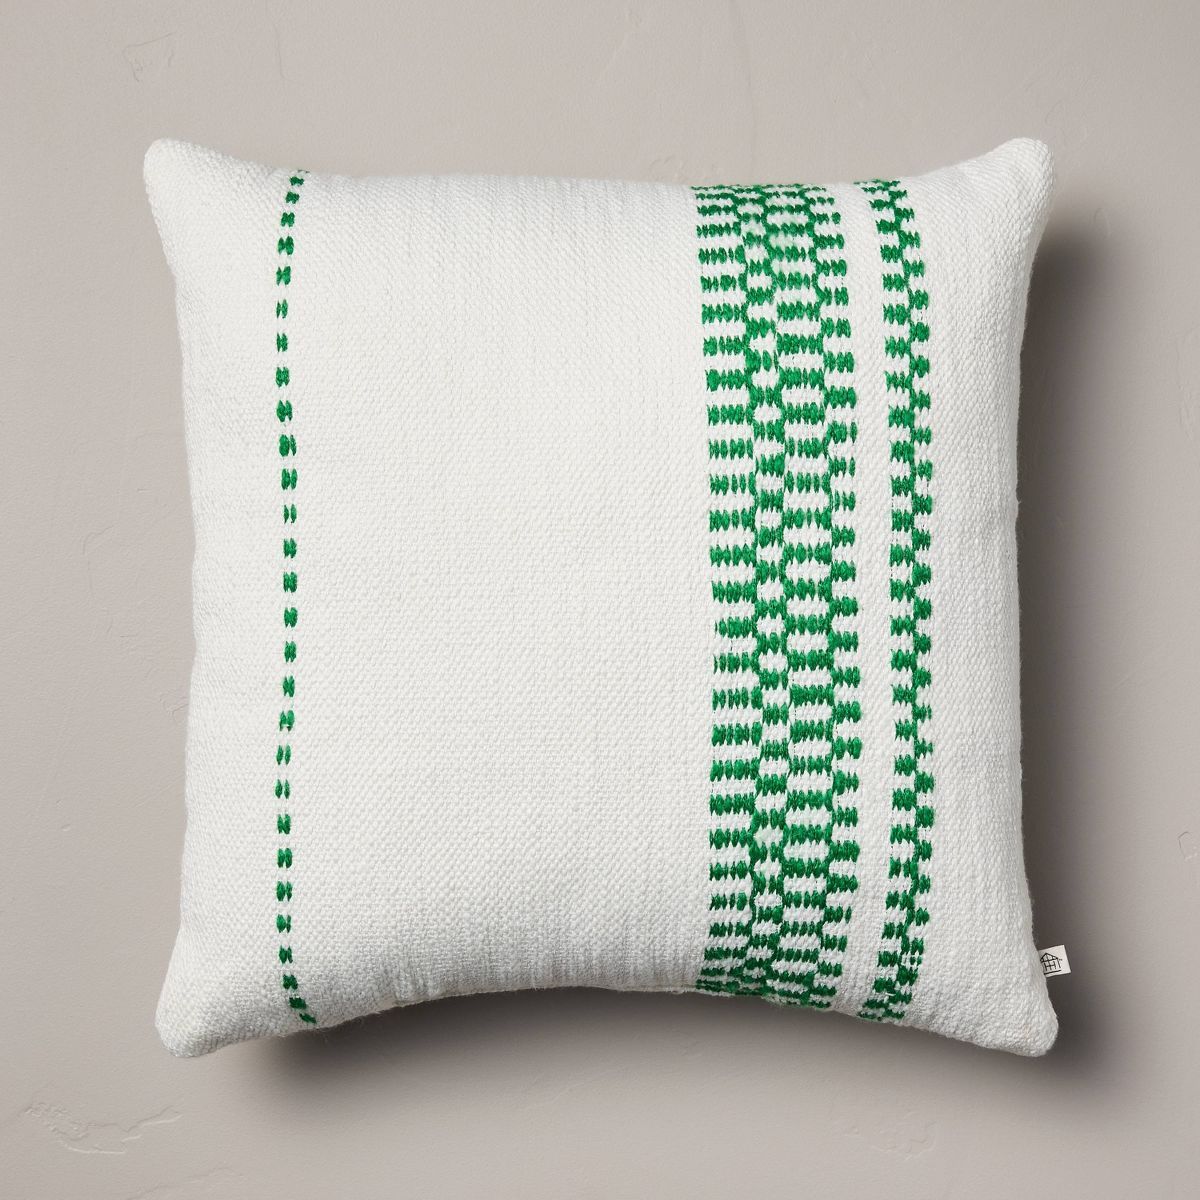 18"x18" Checkered Stripe Indoor/Outdoor Square Throw Pillow Cream/Green - Hearth & Hand™ with M... | Target